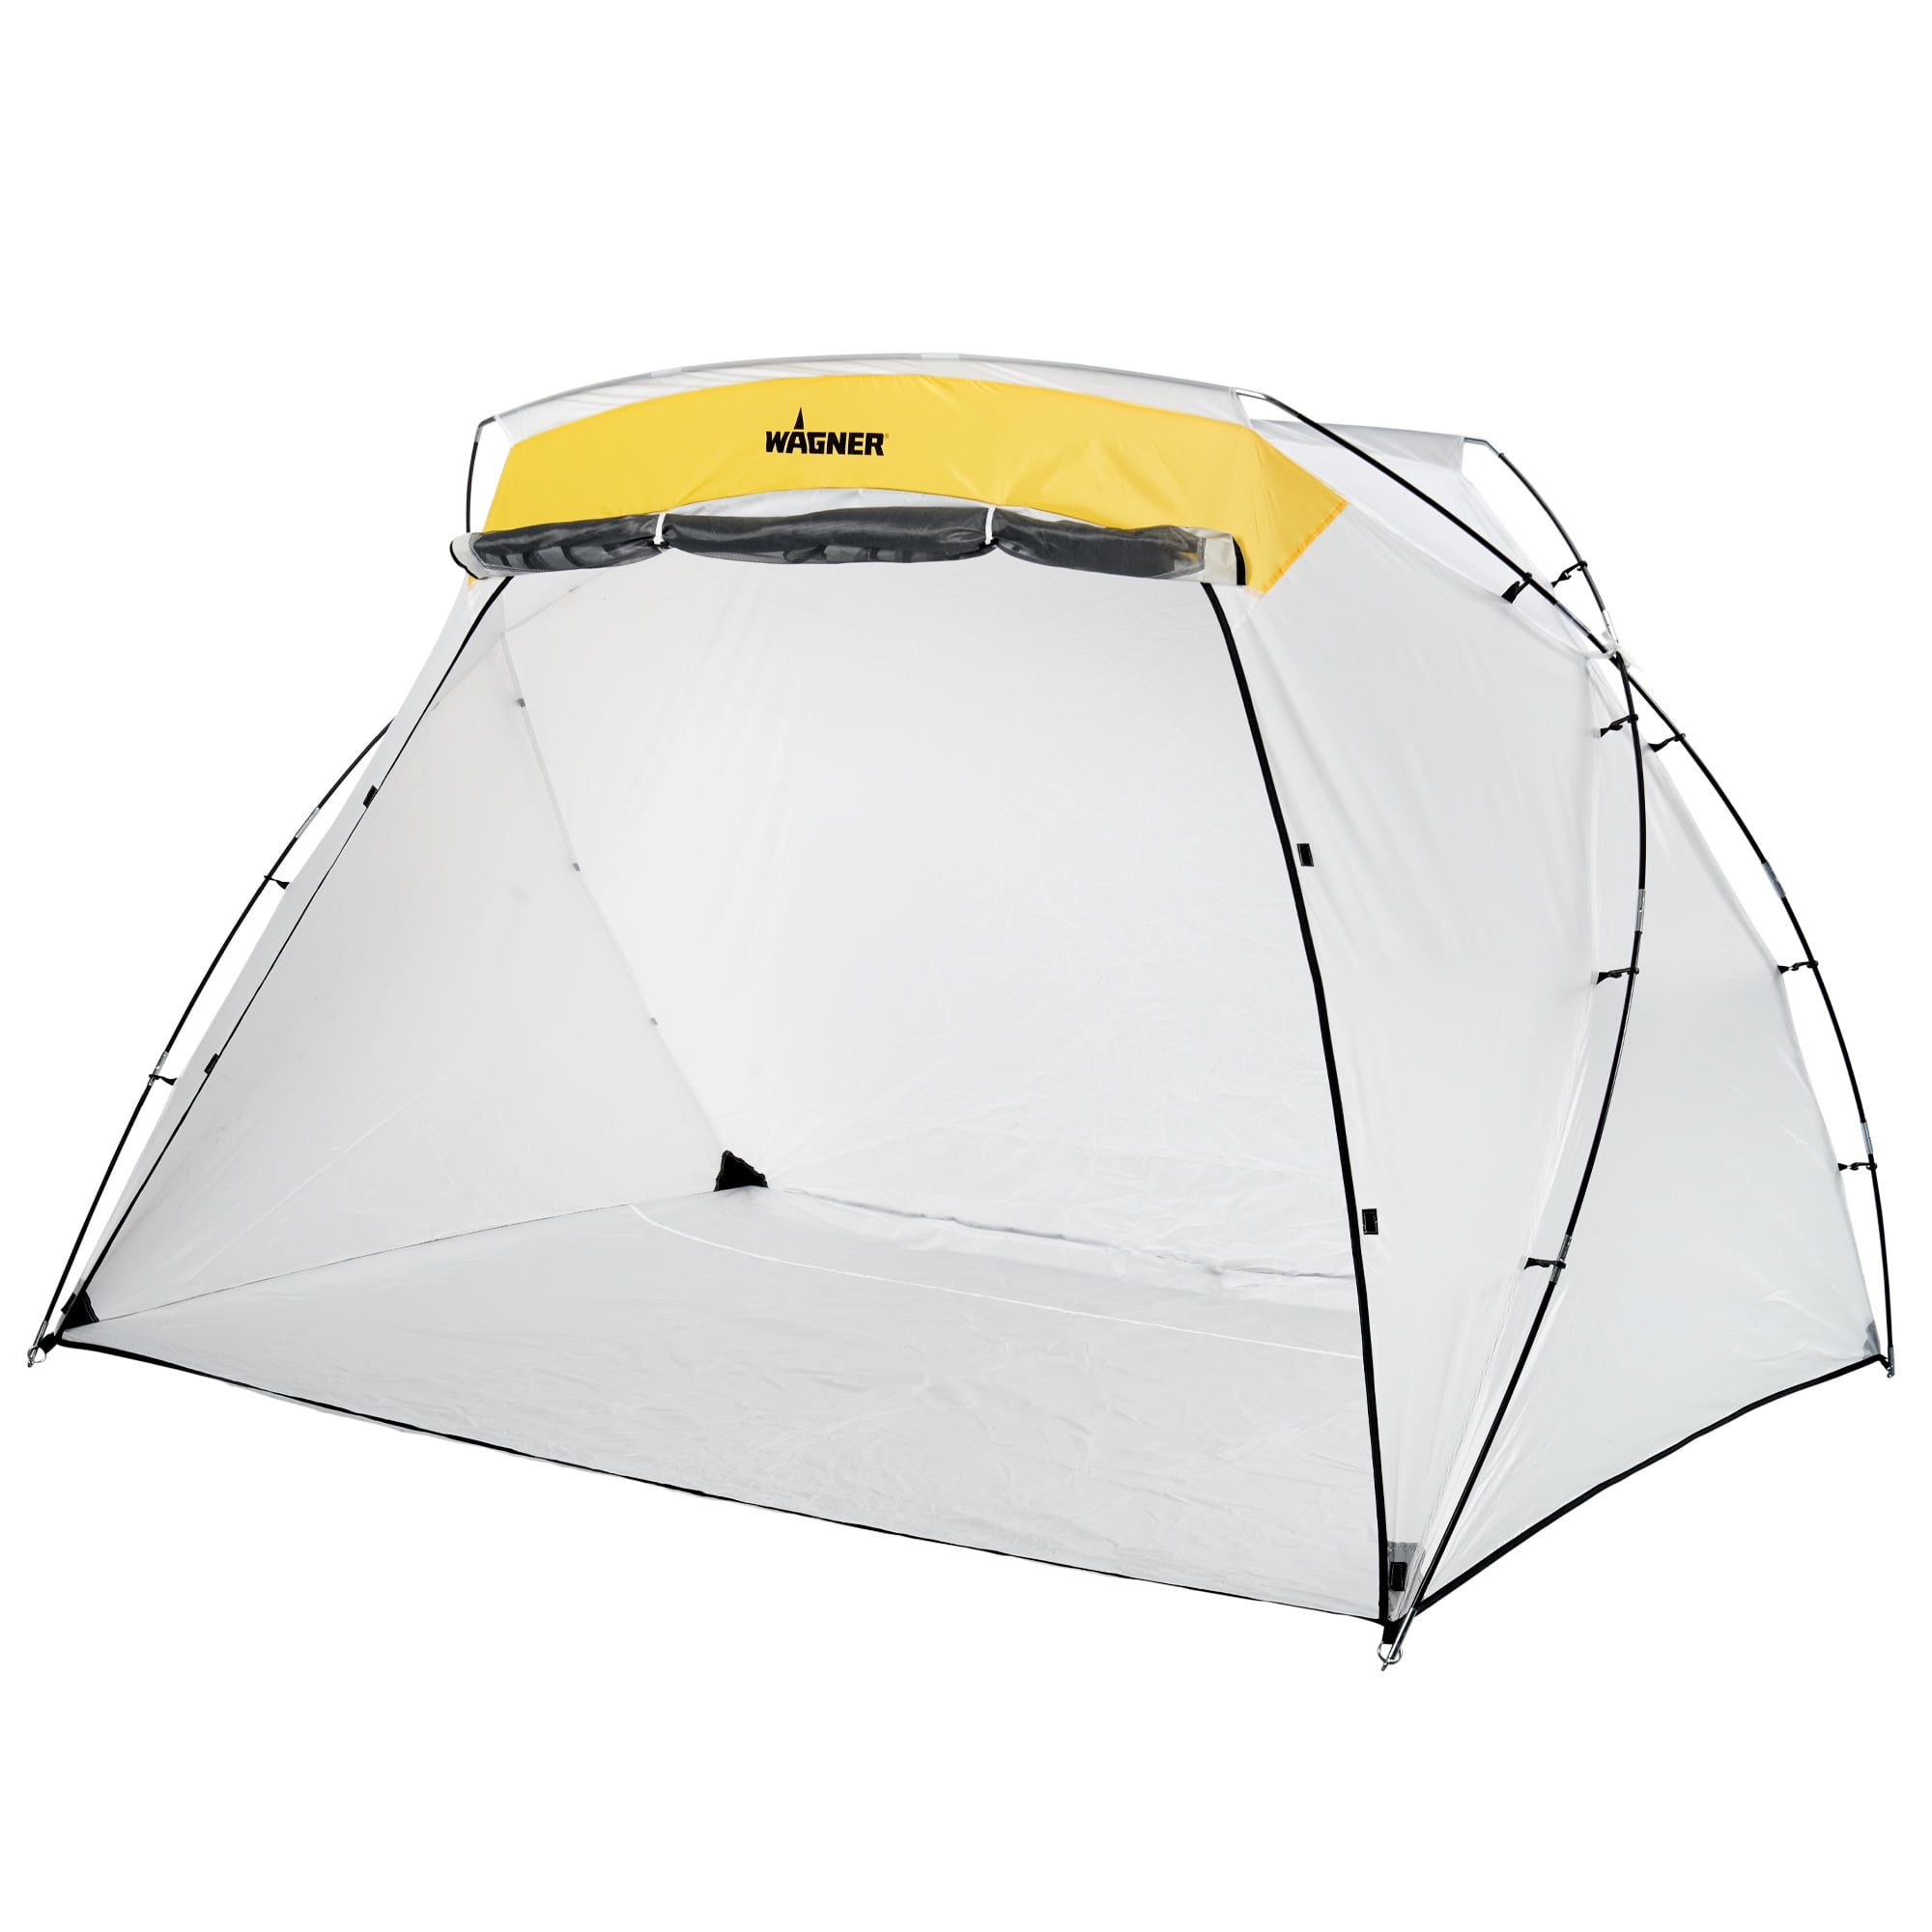 Portable Paint Tent for Spray Painting: Medium Spray Shelter Paint